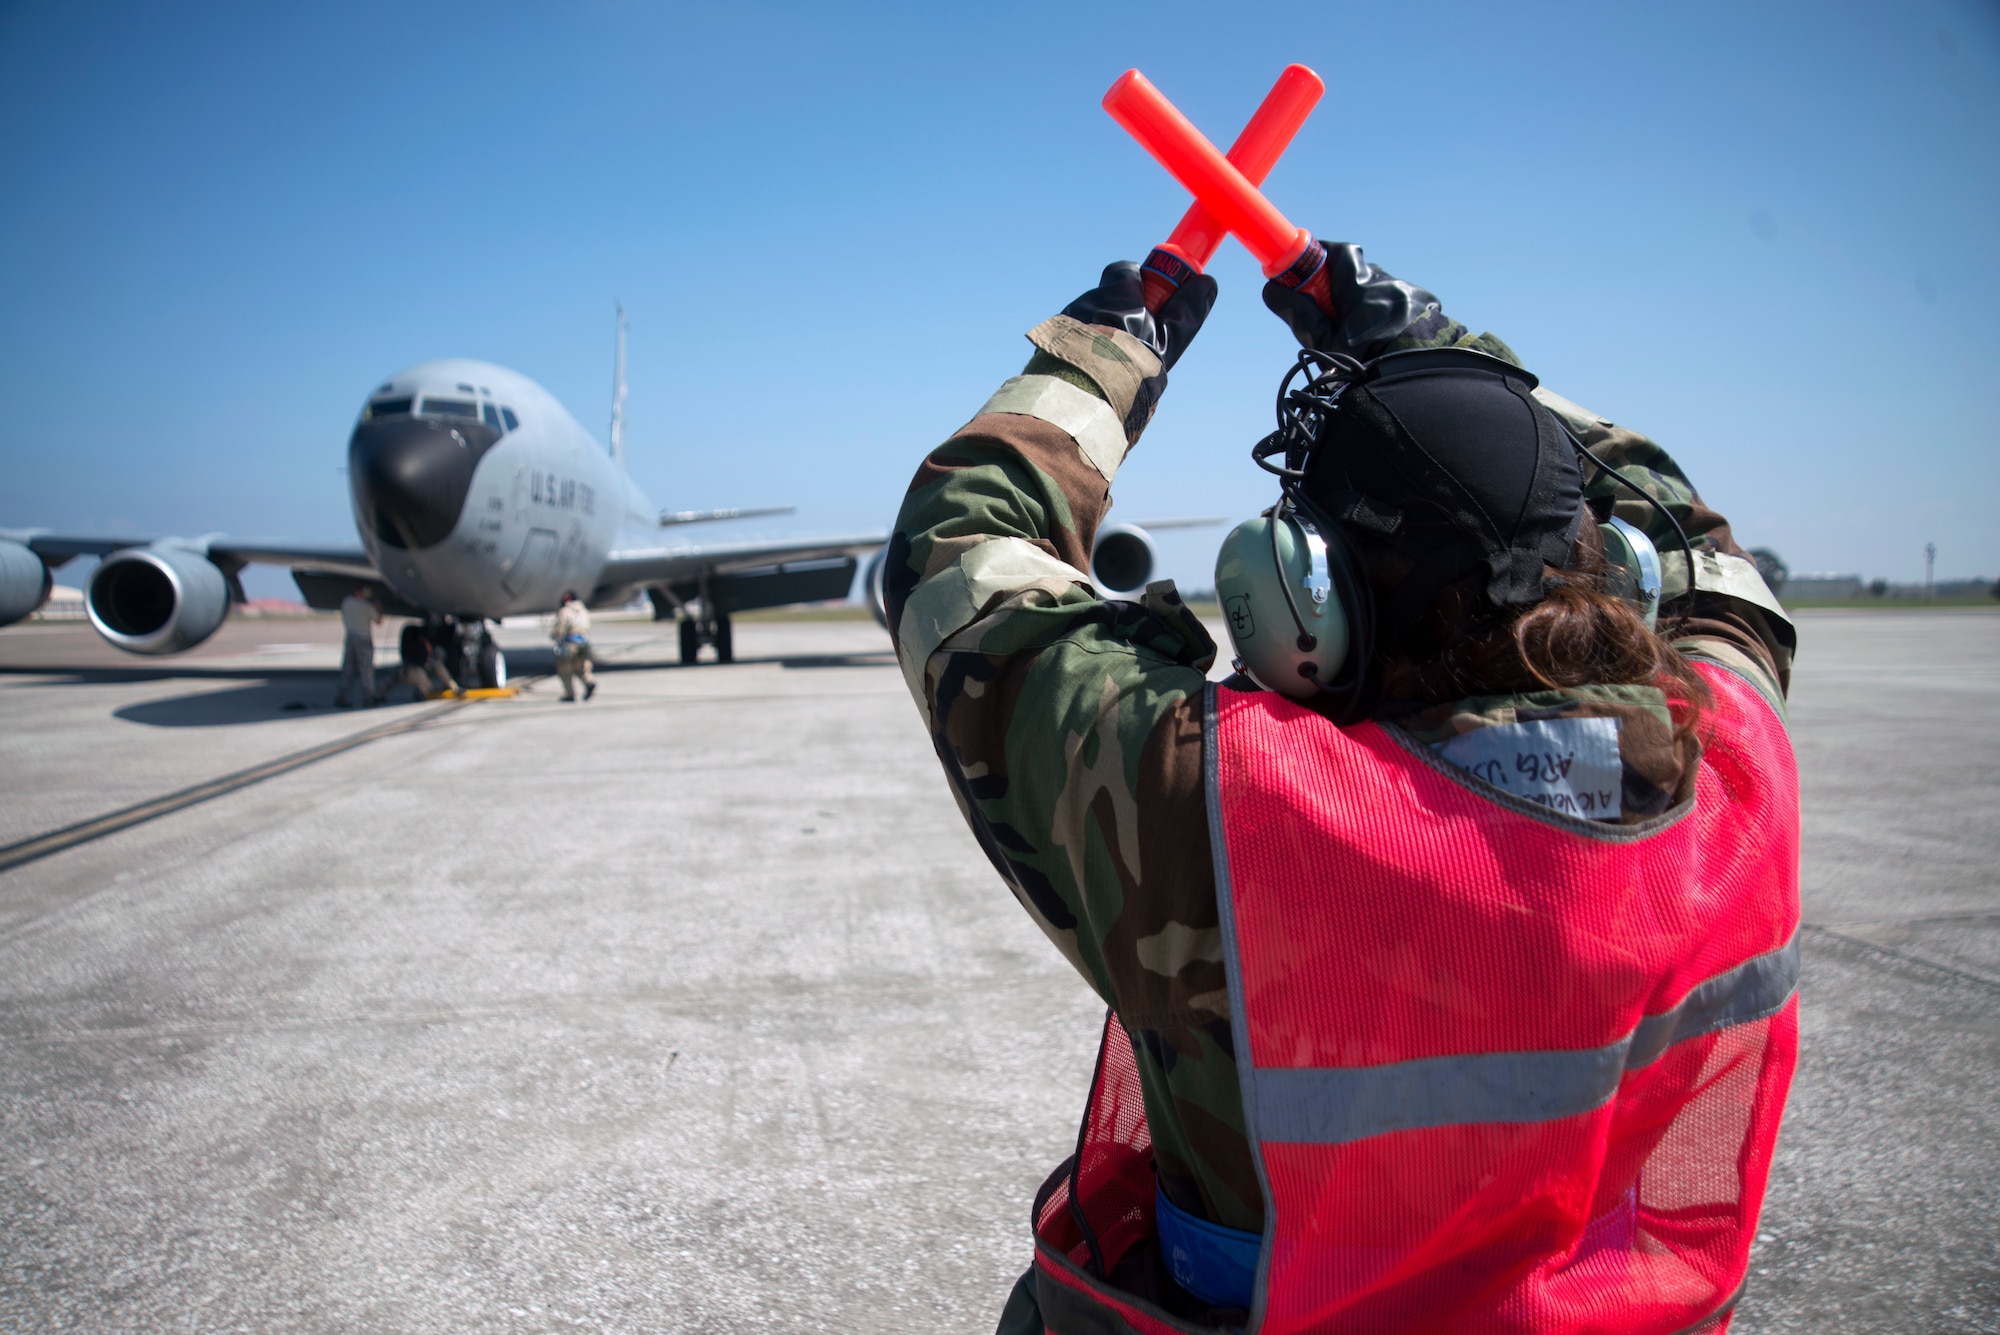 U.S. Air Force Airman 1st Class Victoria Velasquez, a crew chief assigned to the 6th Maintenance Squadron, marshals a KC-135 Stratotanker aircraft during a training exercise at MacDill Air Force Base, Fla., Feb. 14, 2018